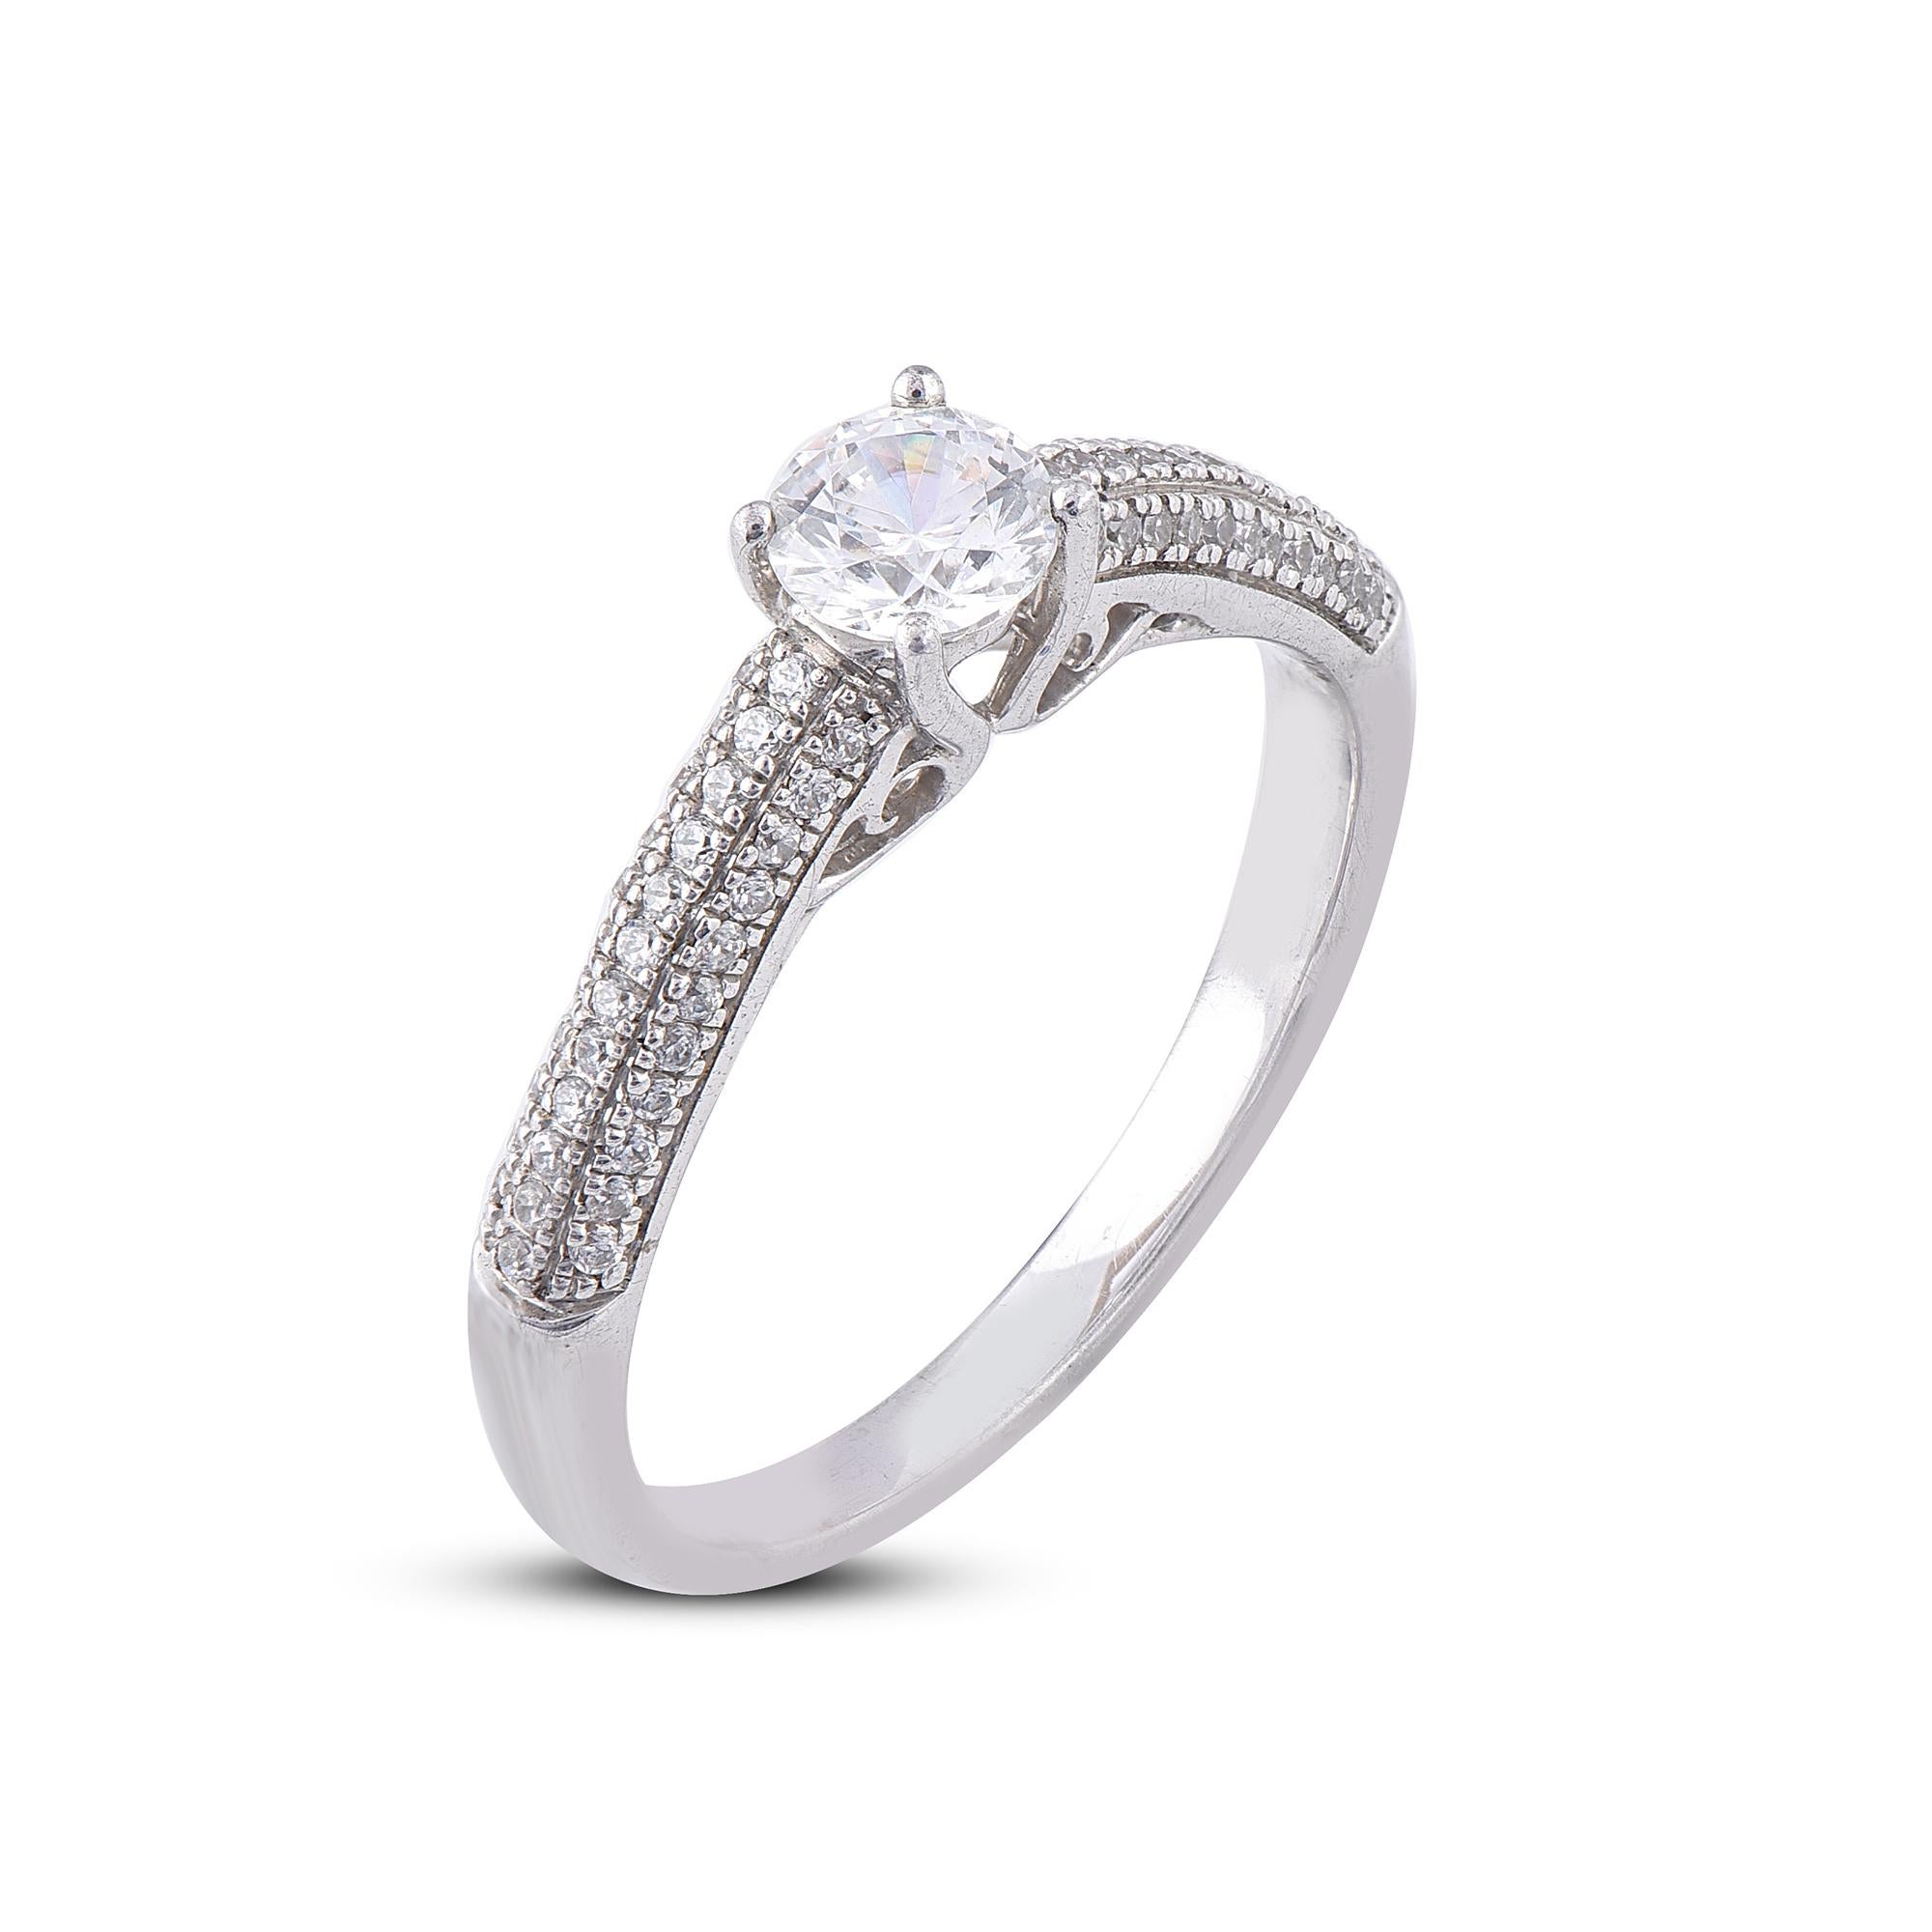 Sparkling with all your wonderful moments, this diamond engagement ring is shining symbol of your commitment. Crafted in 18 karat white gold, this engagement ring features 0.38 ct centre stone and 0.28 ct of diamond on shank lined set with 69 round